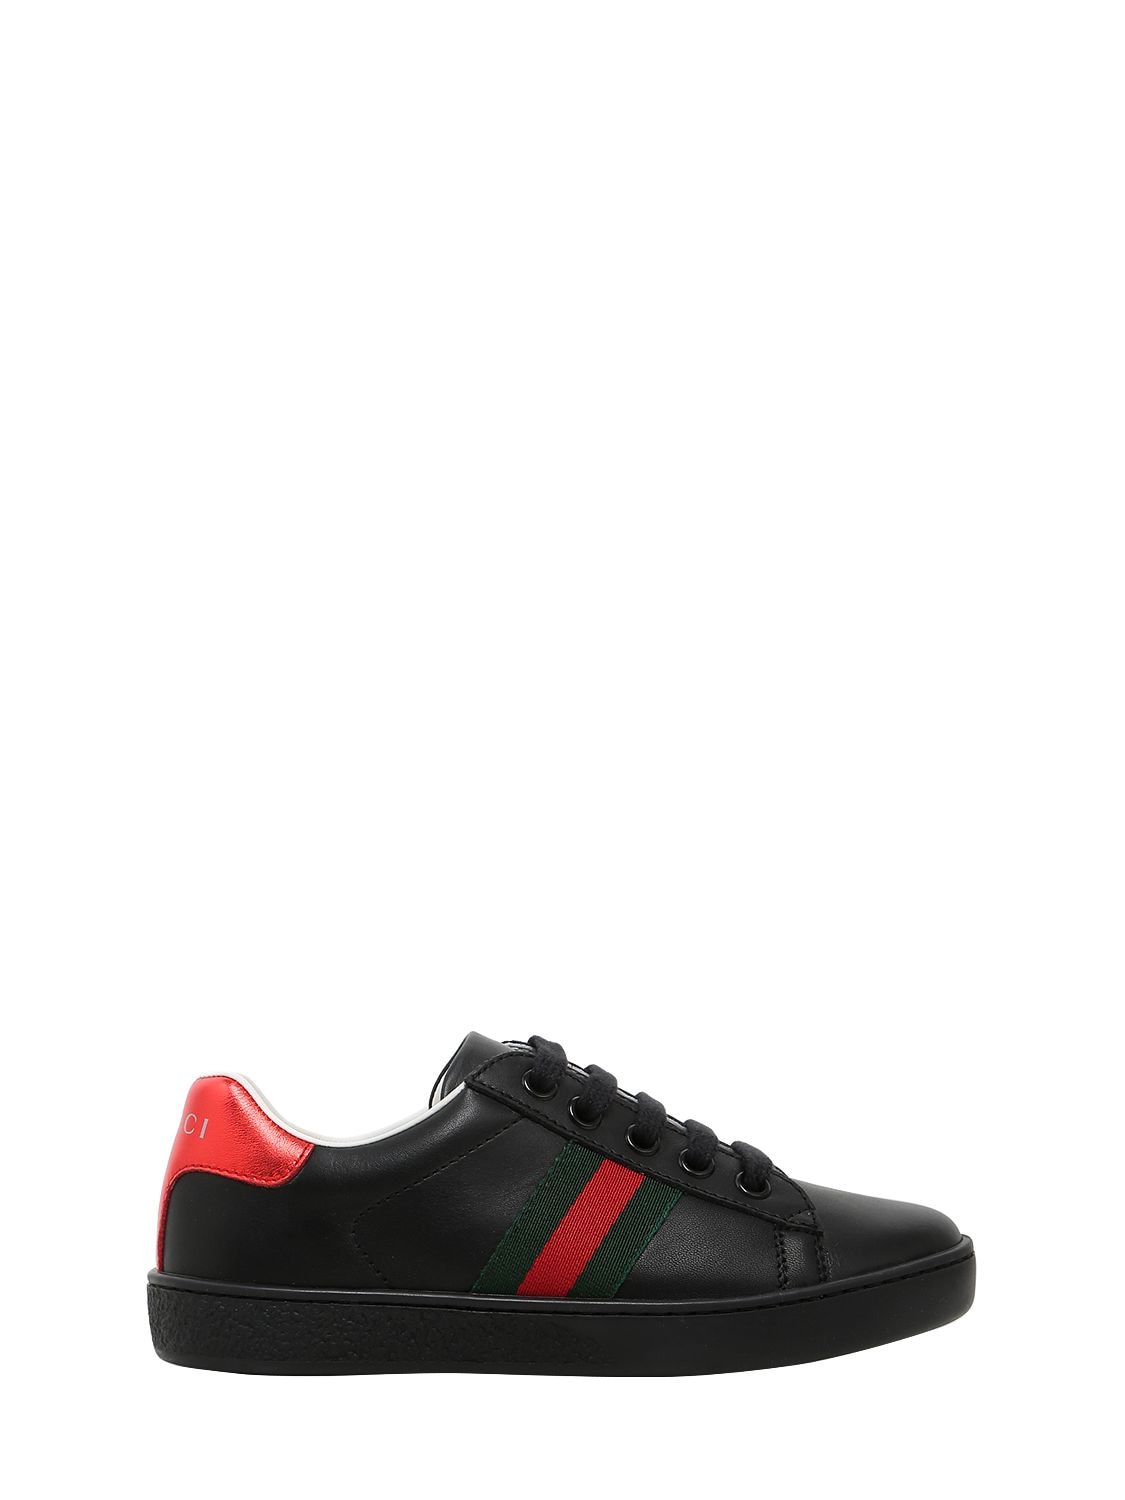 GUCCI LEATHER SNEAKERS,67IFHB033-MTA3NA2